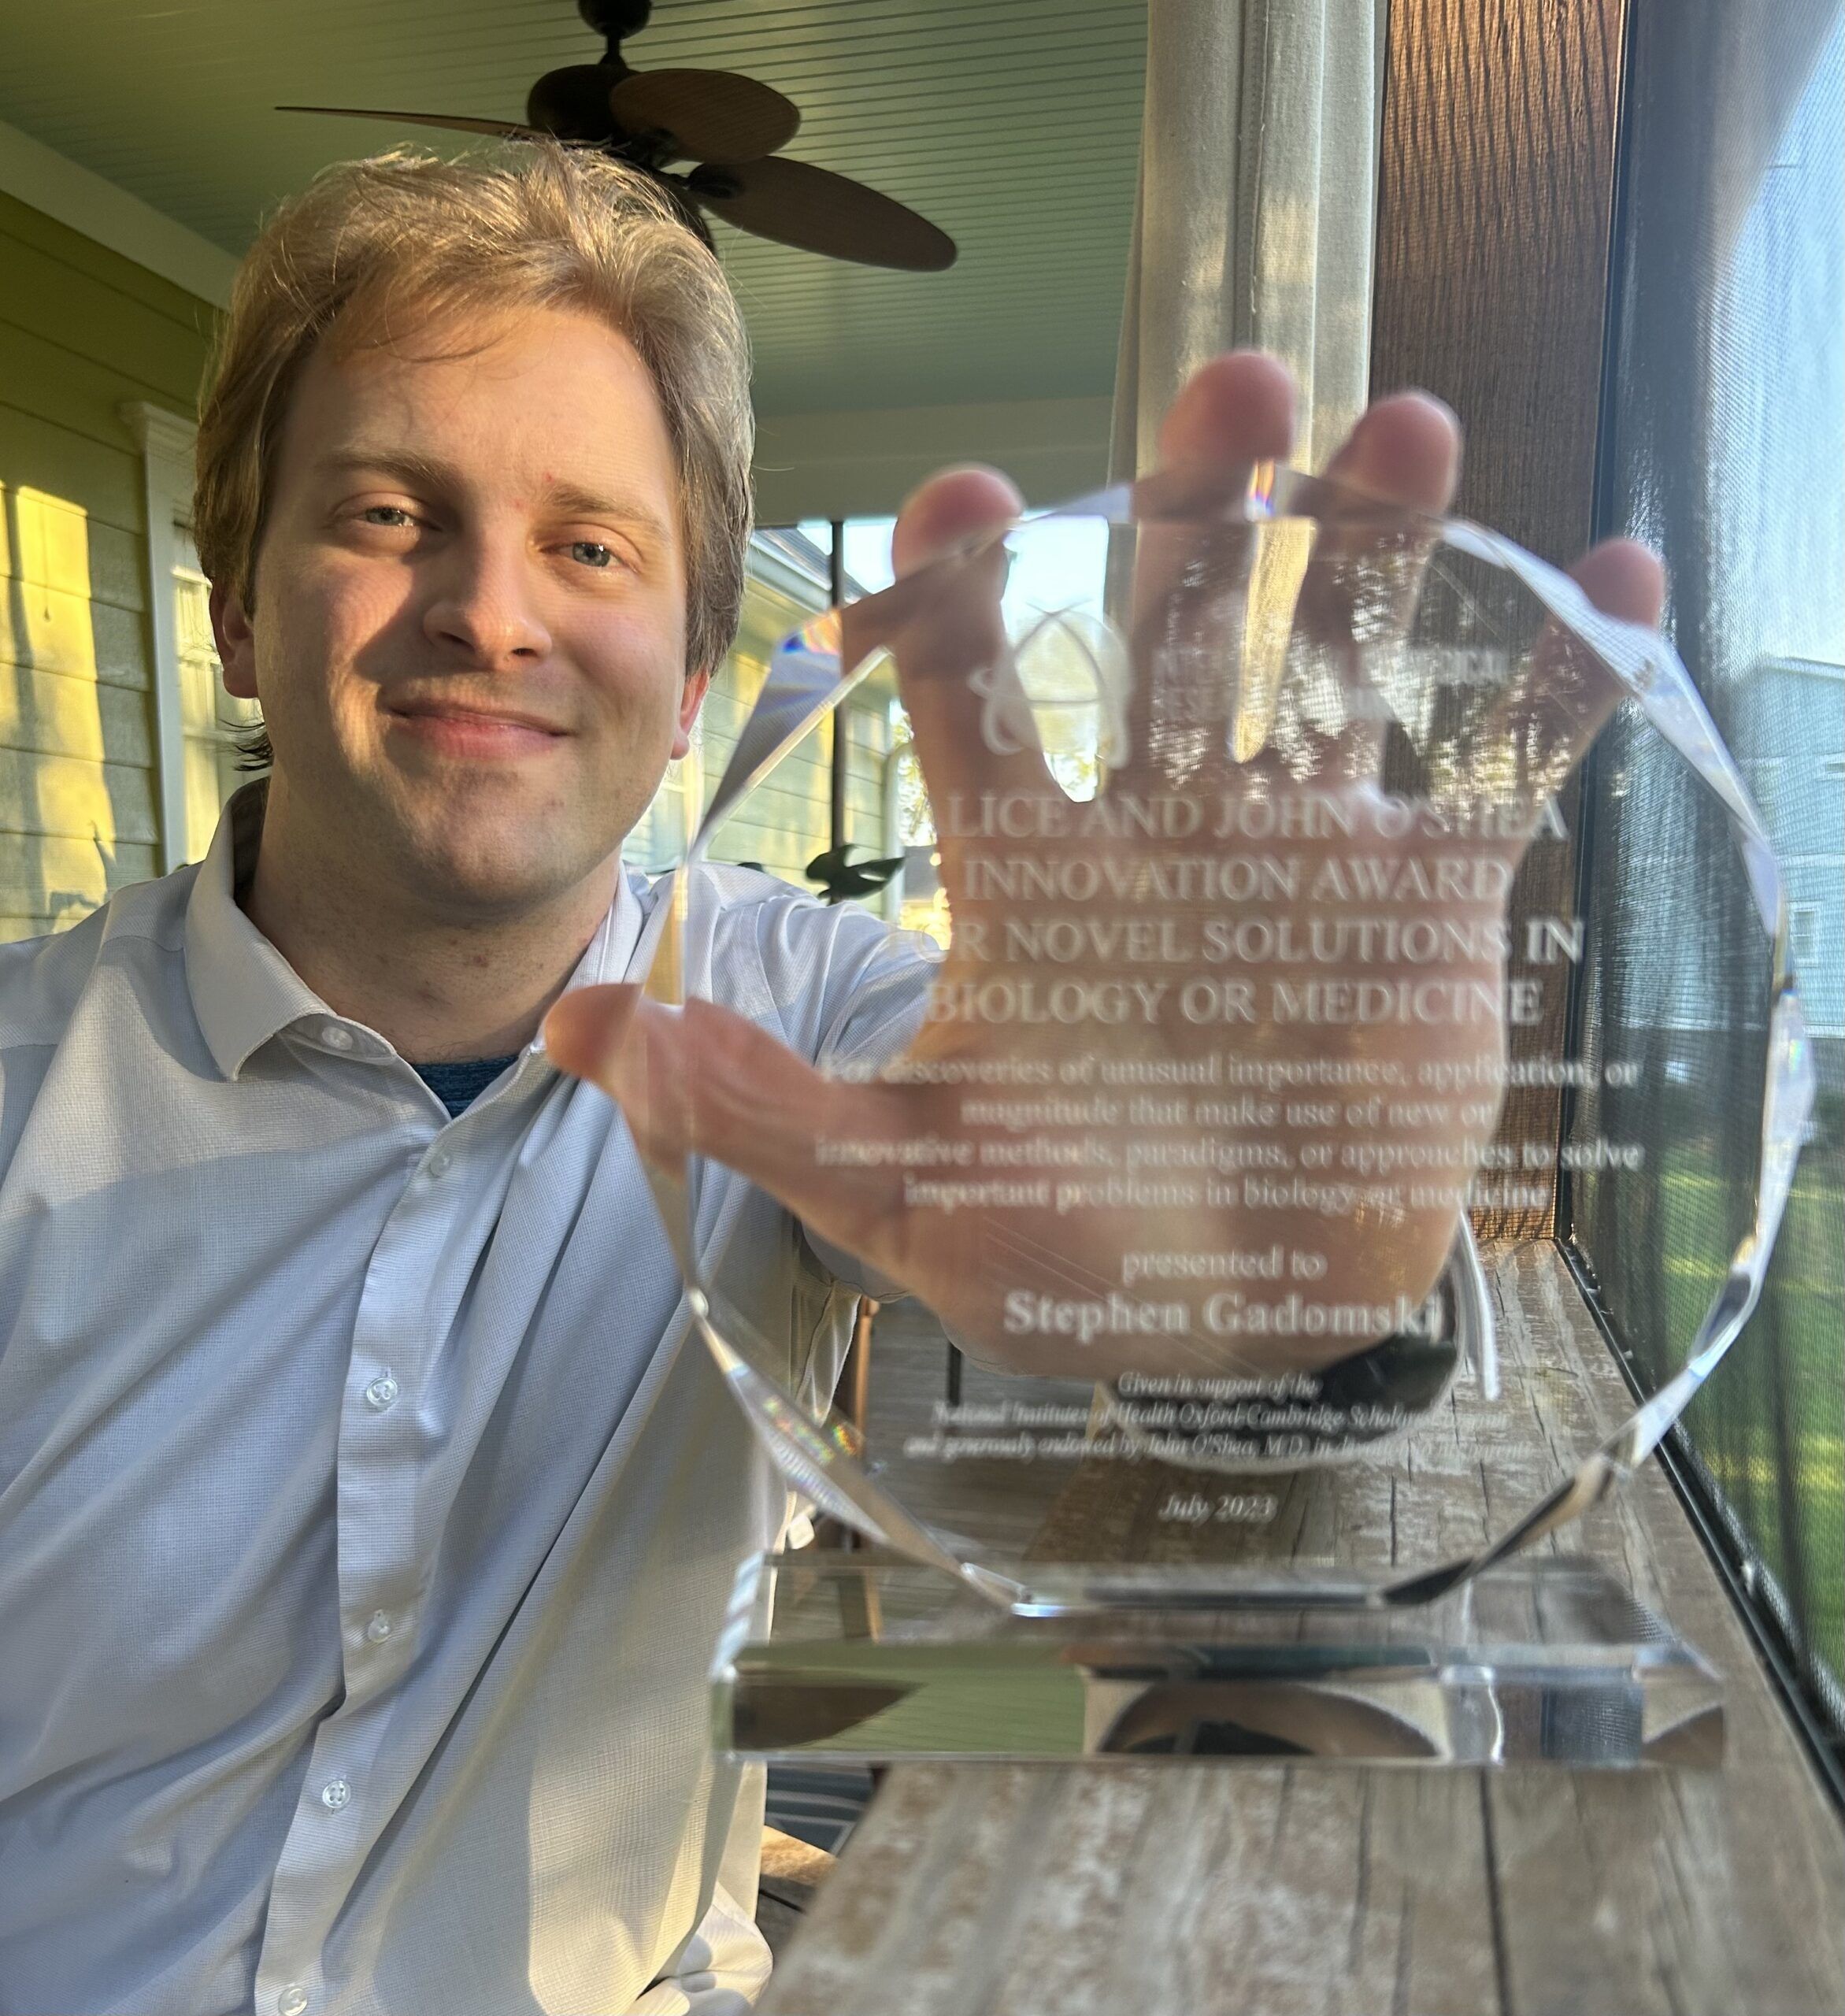 NIH-Cambridge Scholar Dr. Stephen Gadomski Honored with 2023 The John and Alice O’Shea Innovation Award for Novel Solutions in Biology or Medicine